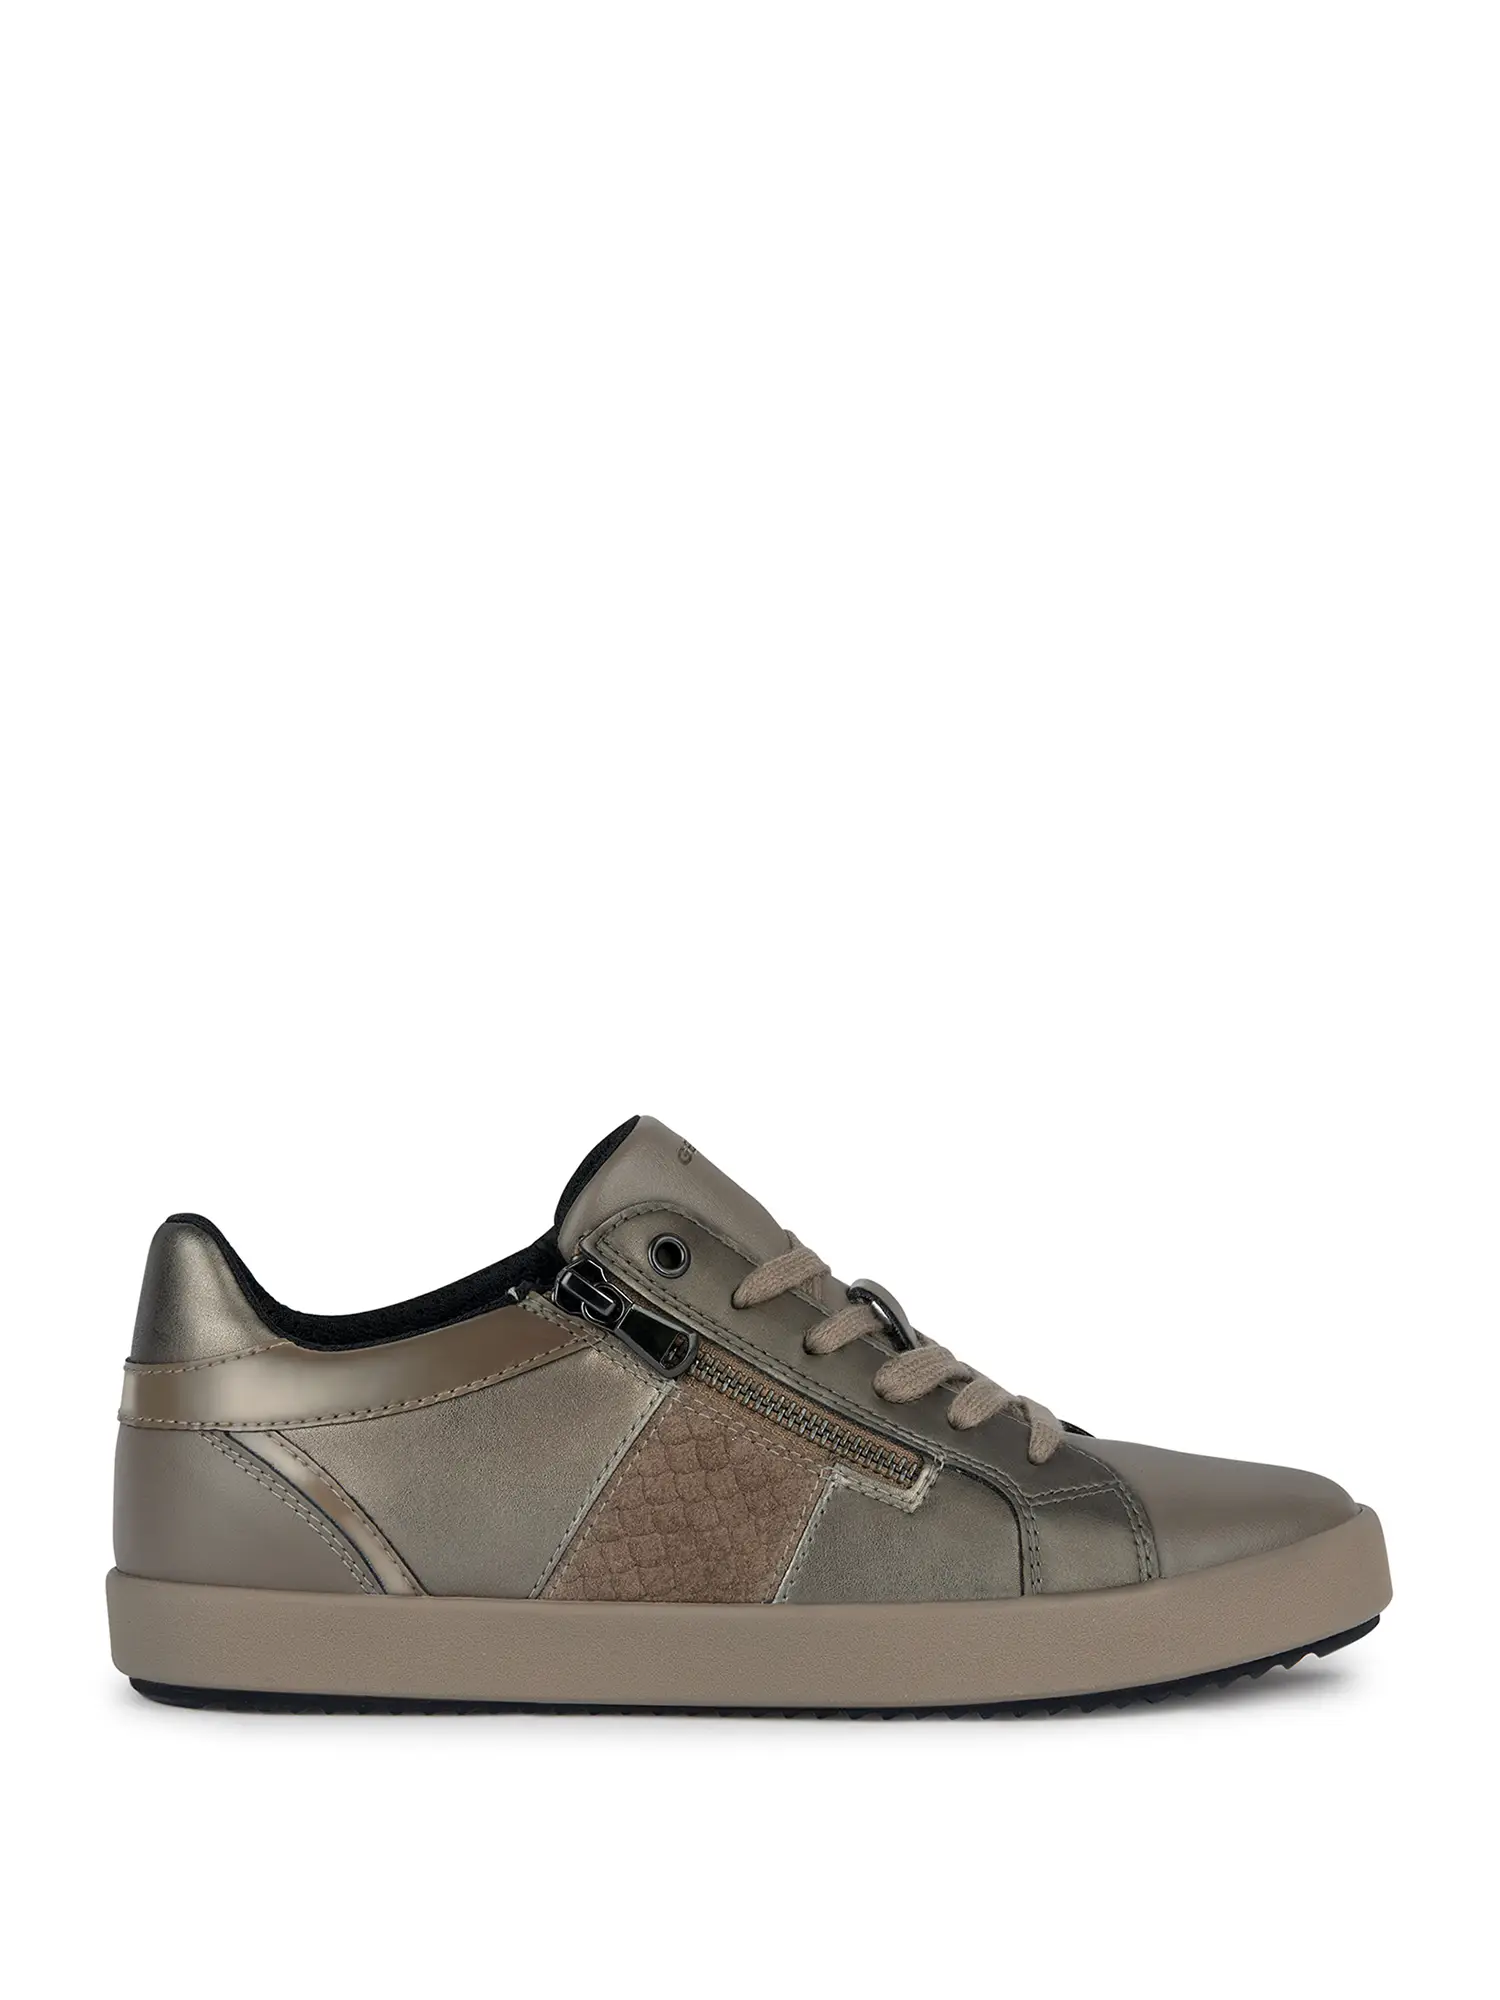 SNEAKERS DONNA - GEOX - D366HE 0BNBS - TAUPE, 35